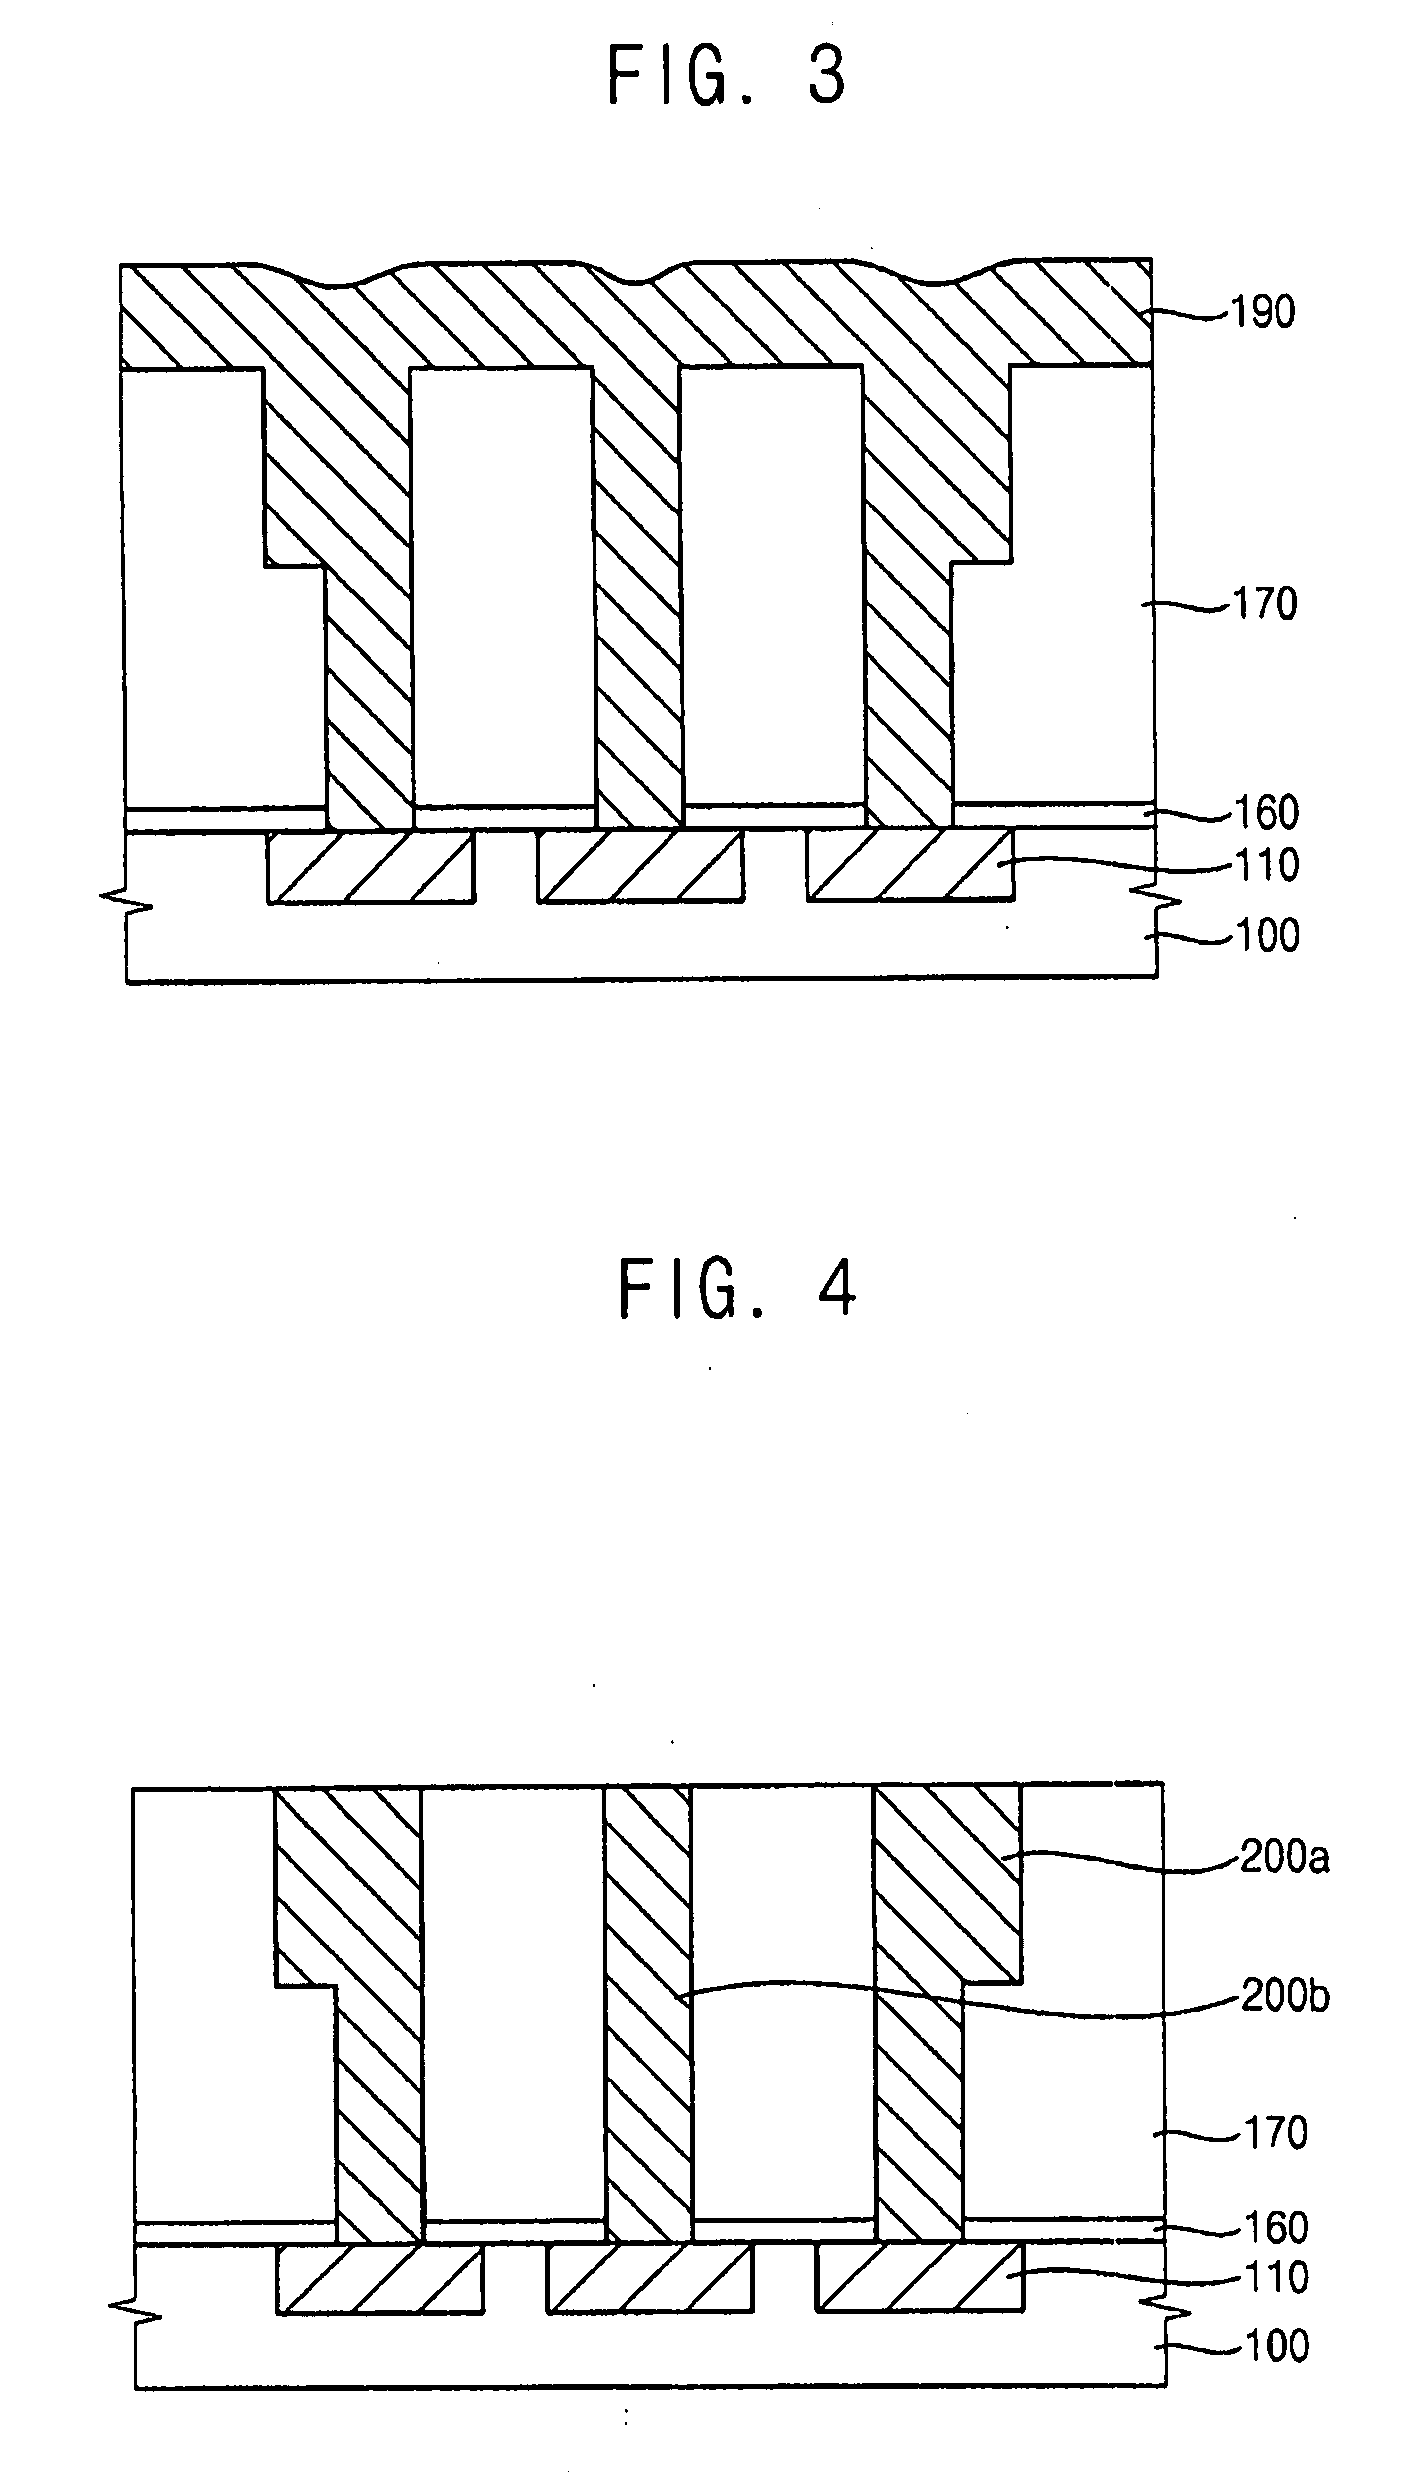 Method of manufacturing a semiconductor device having air gaps